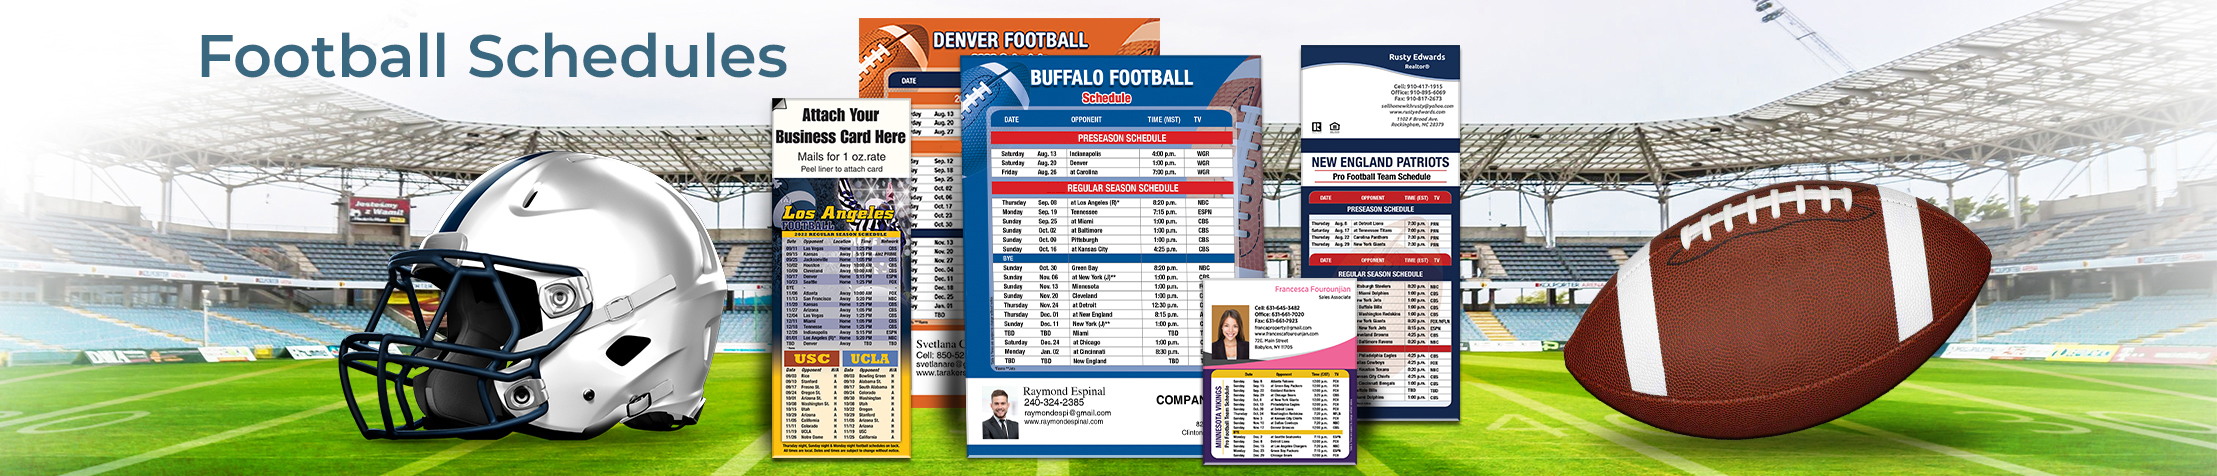 Independent Realtor Real Estate Football Schedules - IR  personalized football schedules | BestPrintBuy.com